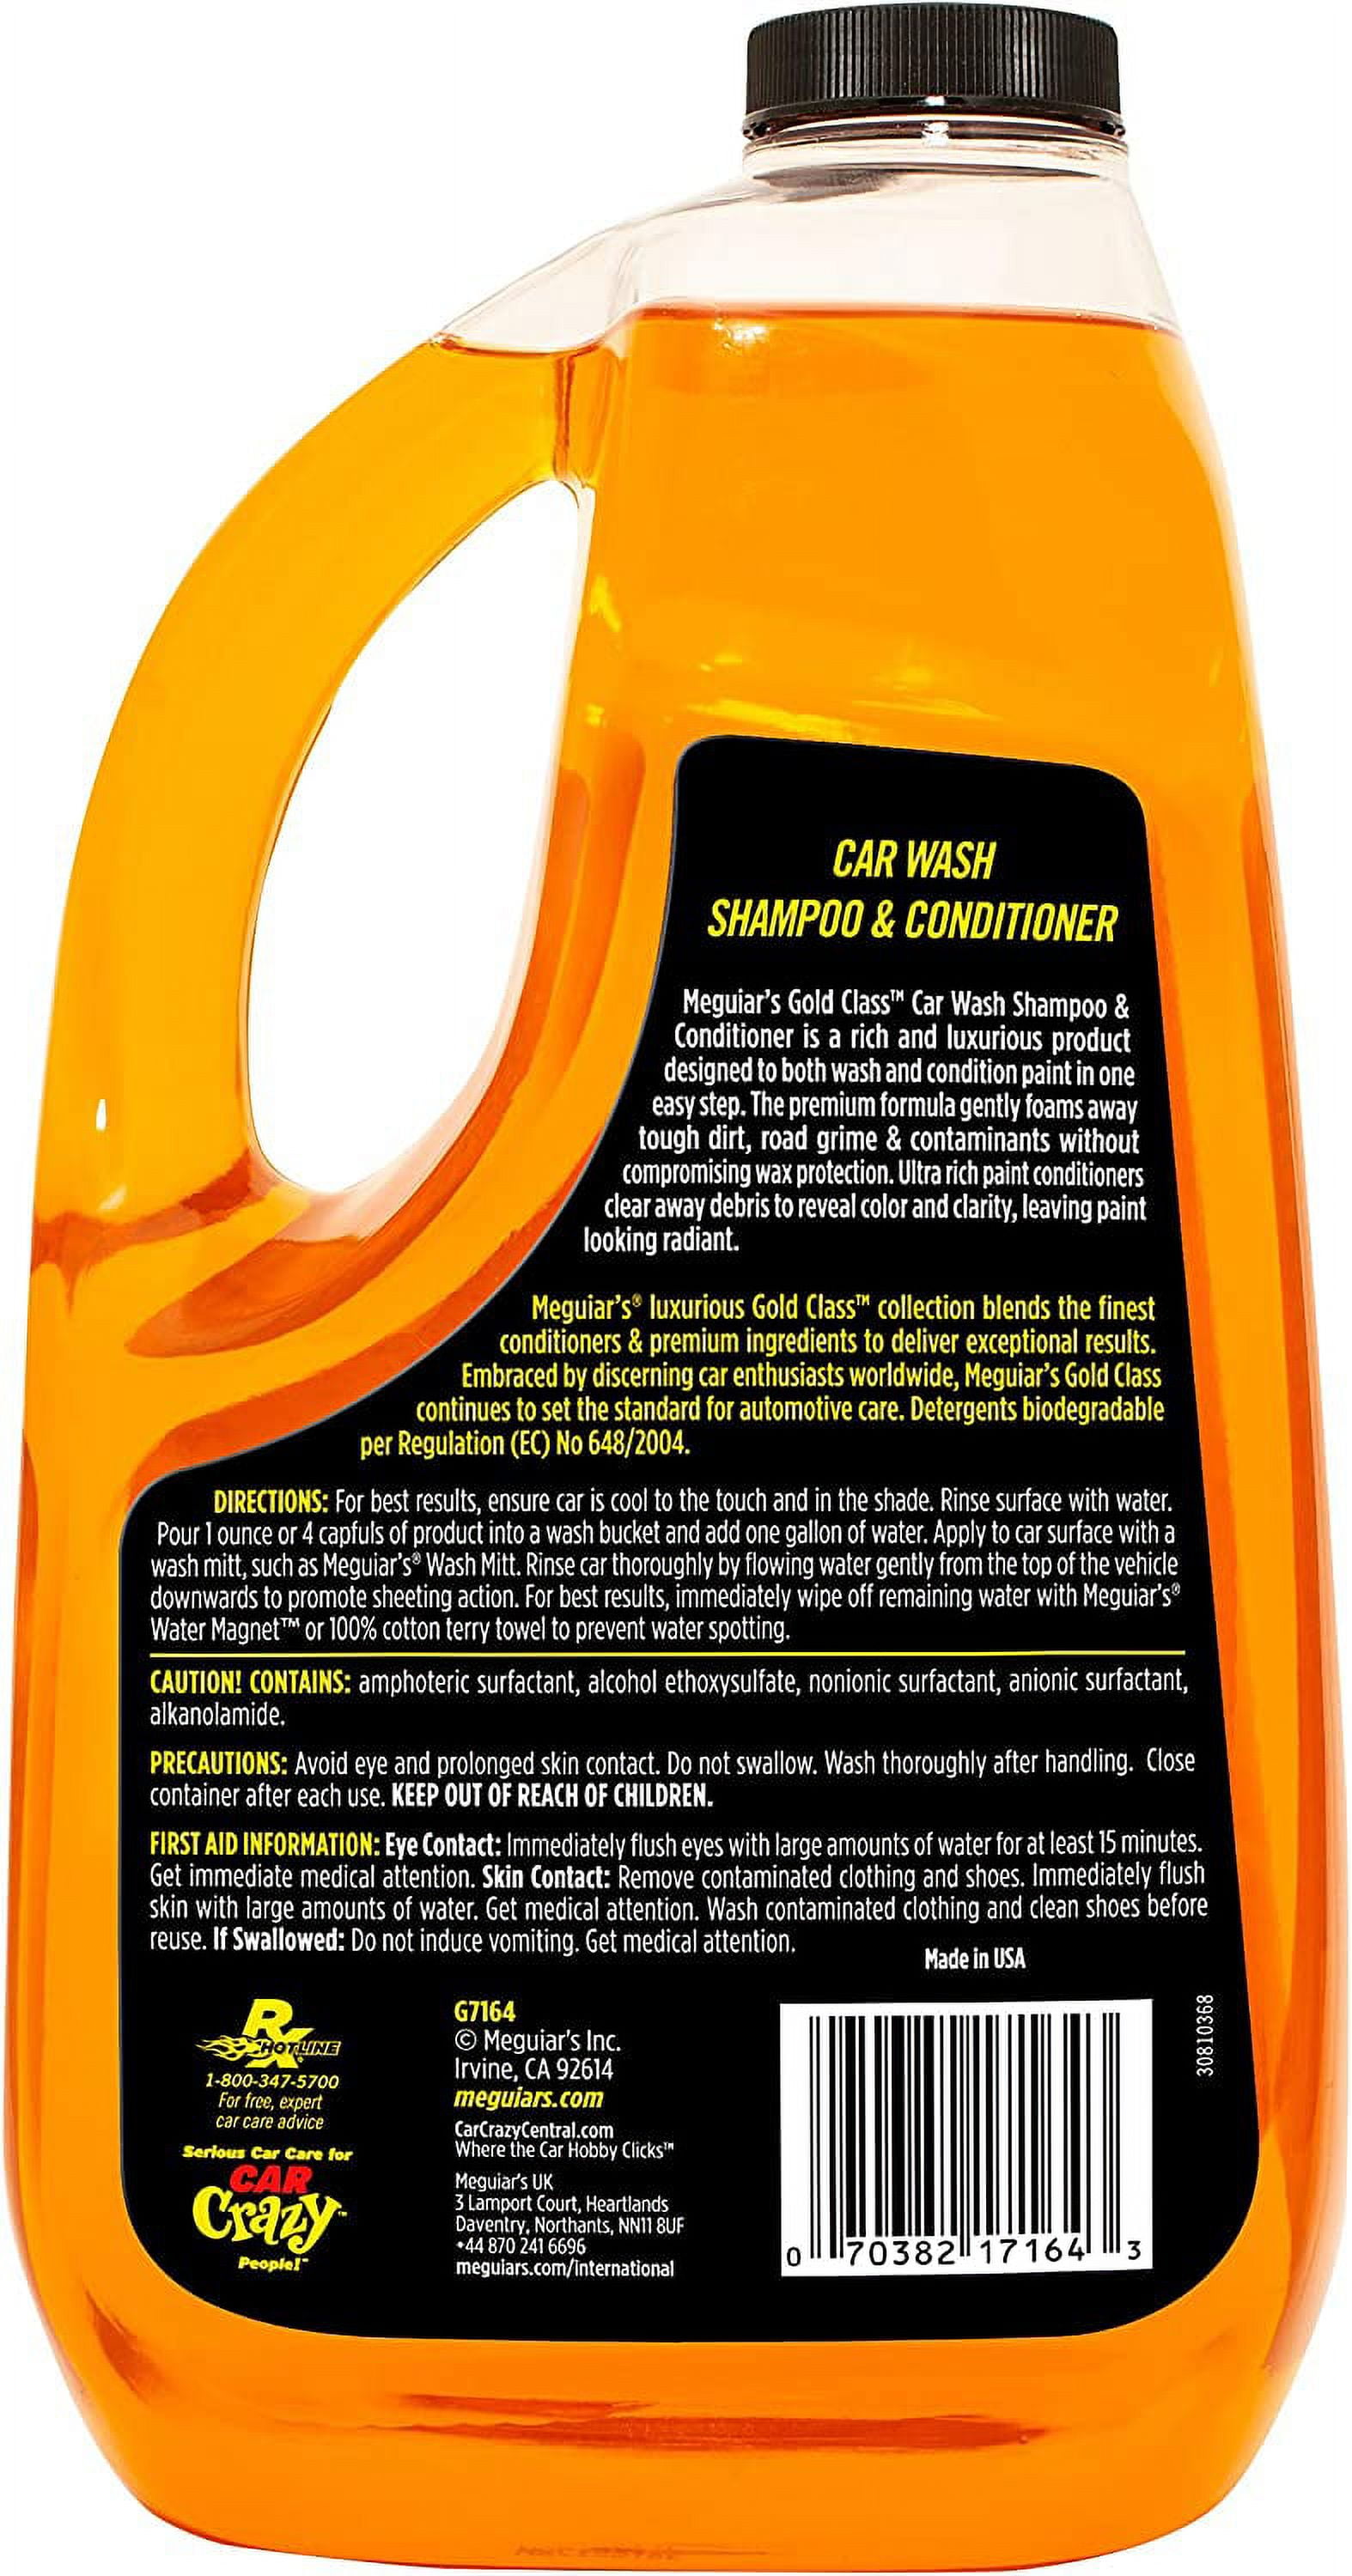 Meguiars Gold Class Car Wash test results and review on my 2009